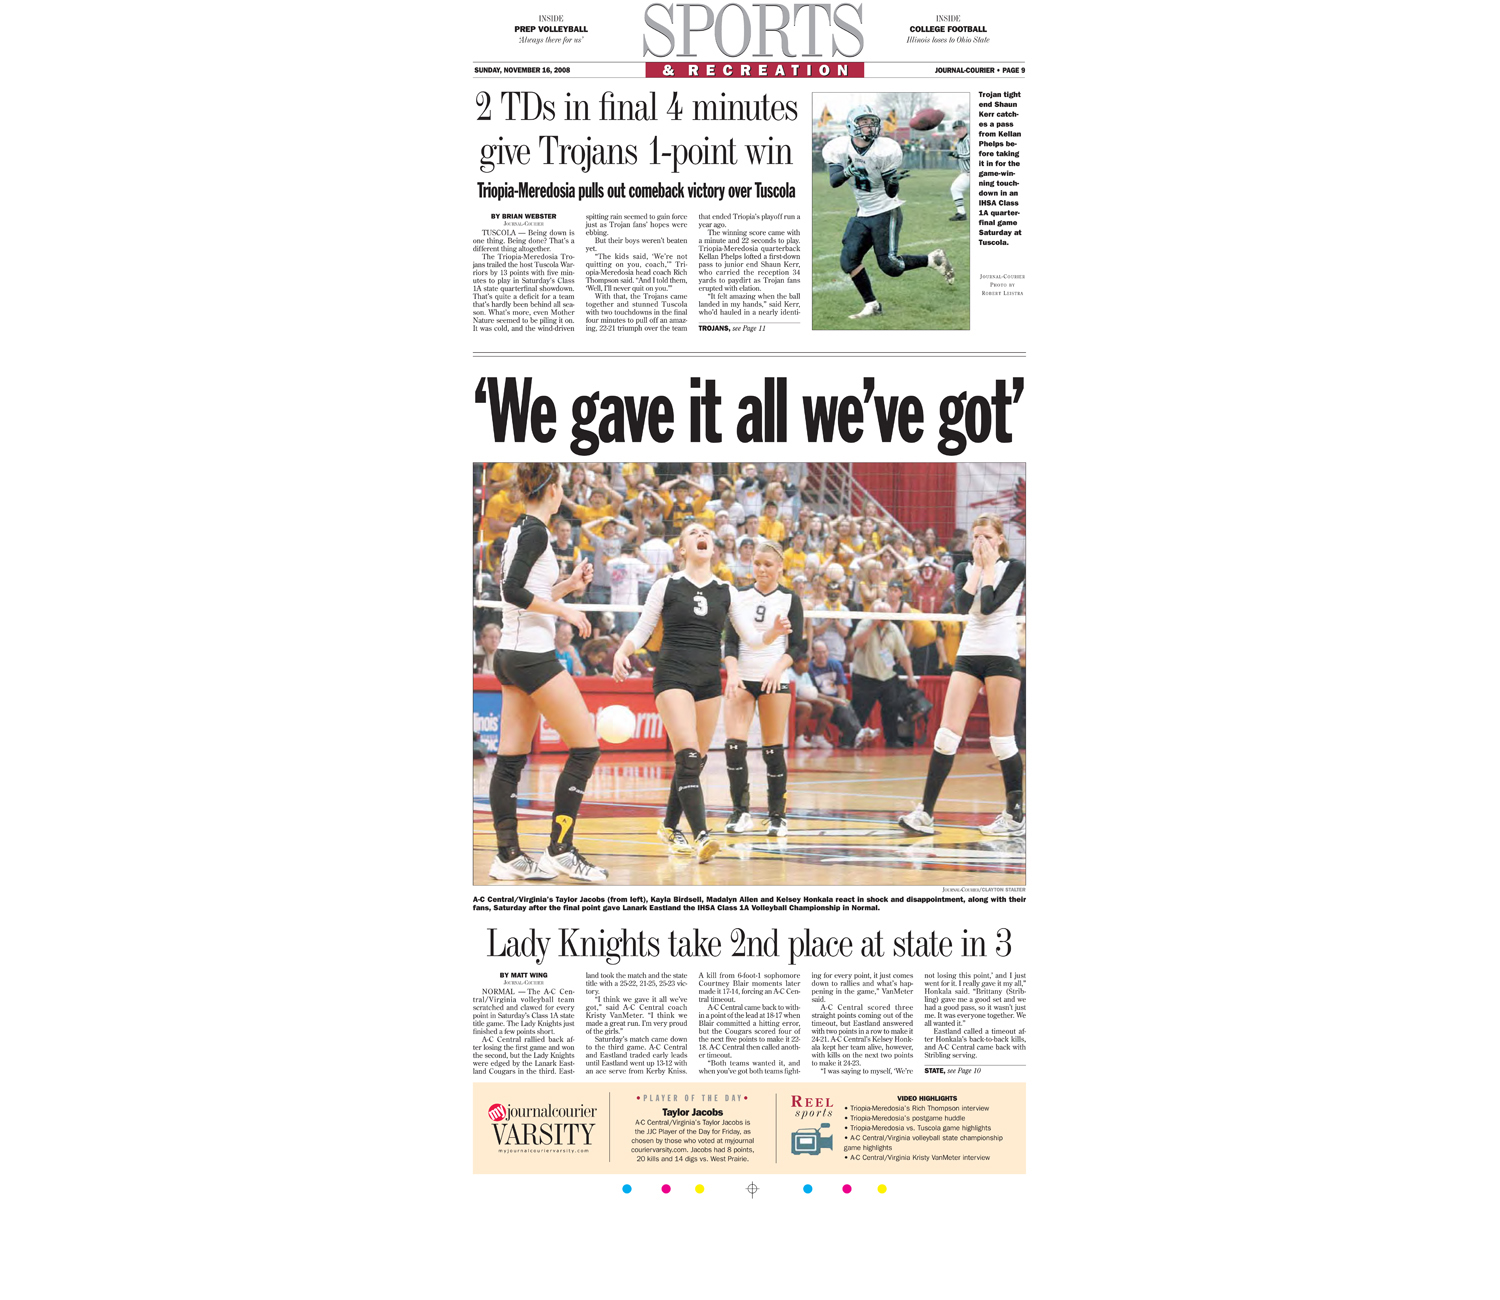  Daily coverage of A-C Central High School's loss in the second day of the IHSA Girls Volleyball State Tournament. 